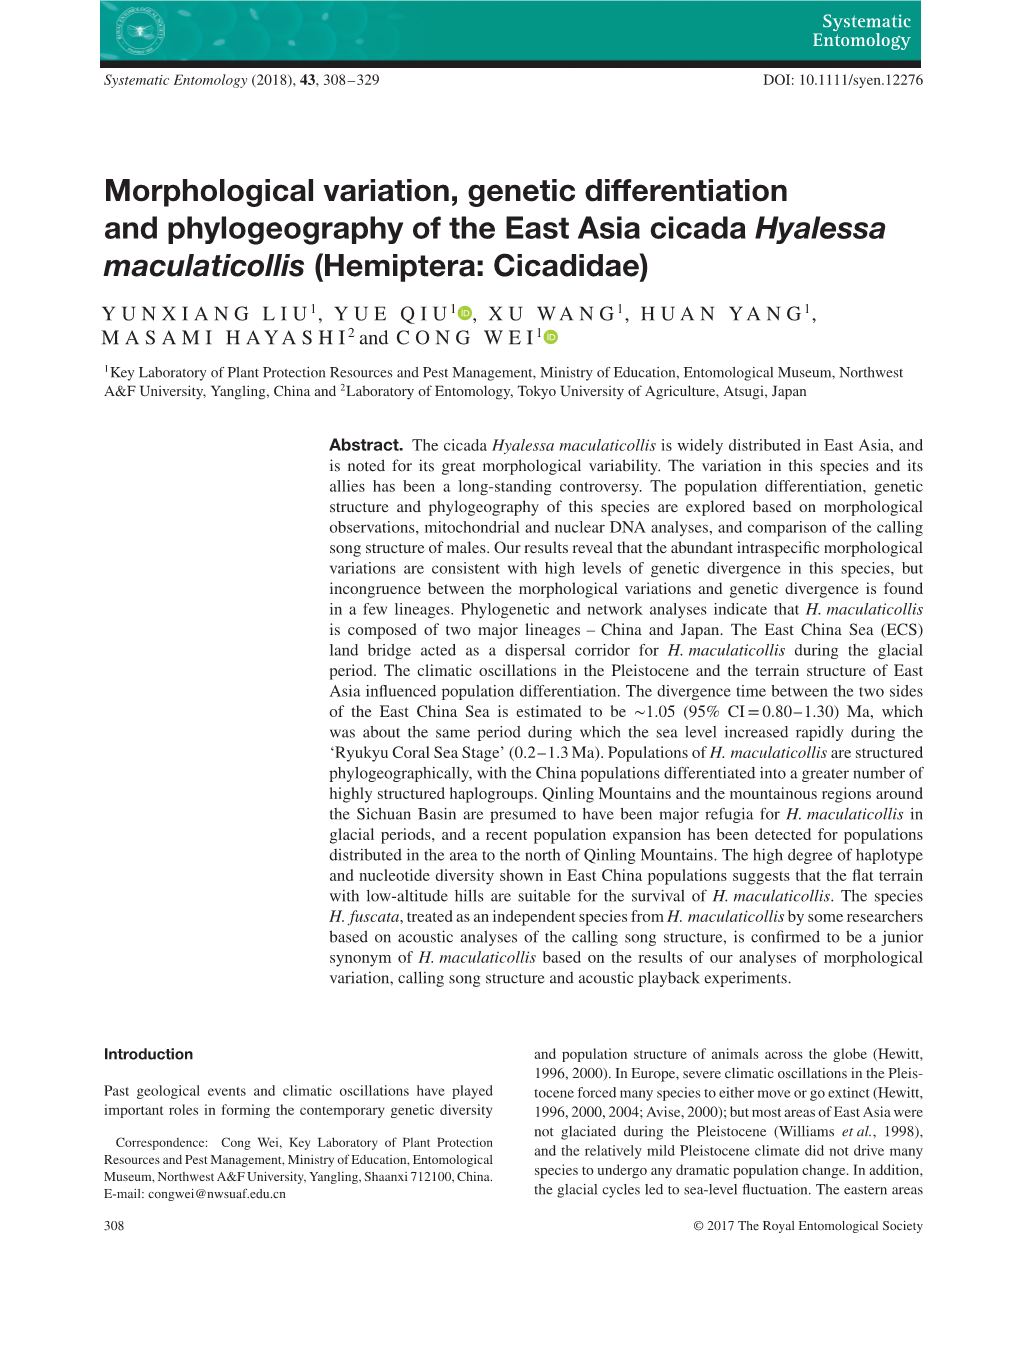 Morphological Variation, Genetic Differentiation and Phylogeography of the East Asia Cicada Hyalessa Maculaticollis (Hemiptera: Cicadidae)